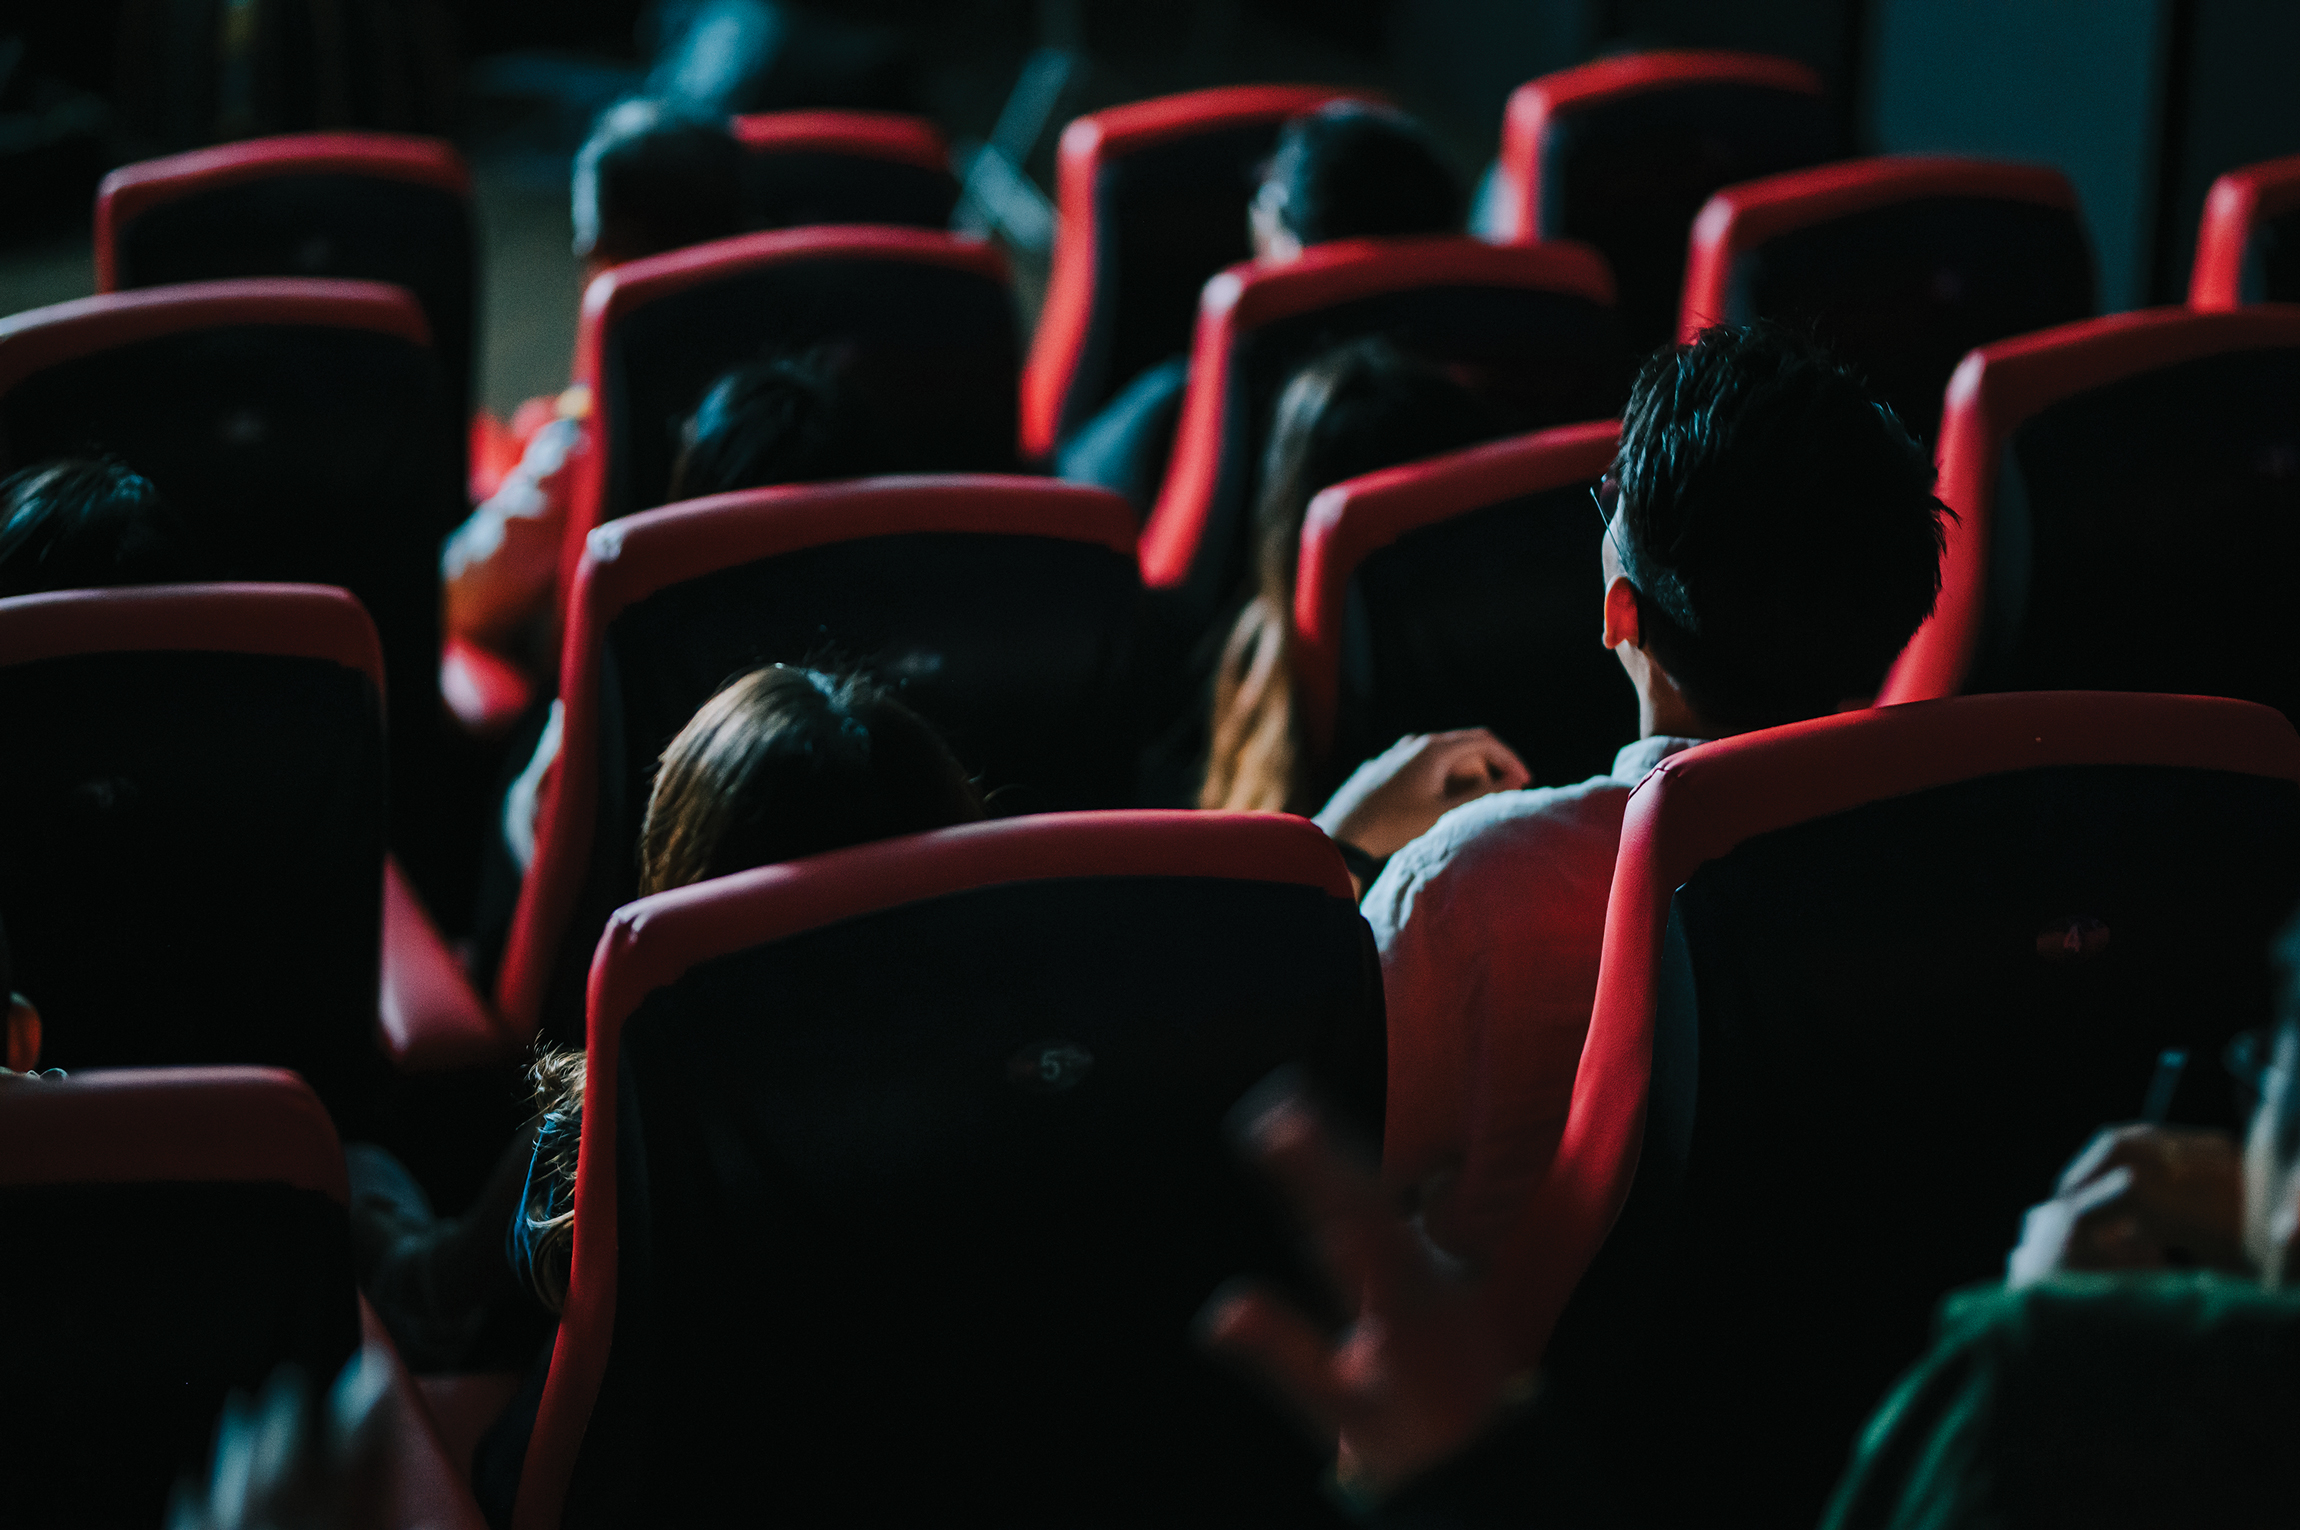 Rear view of audience watching 3D movie in a theater